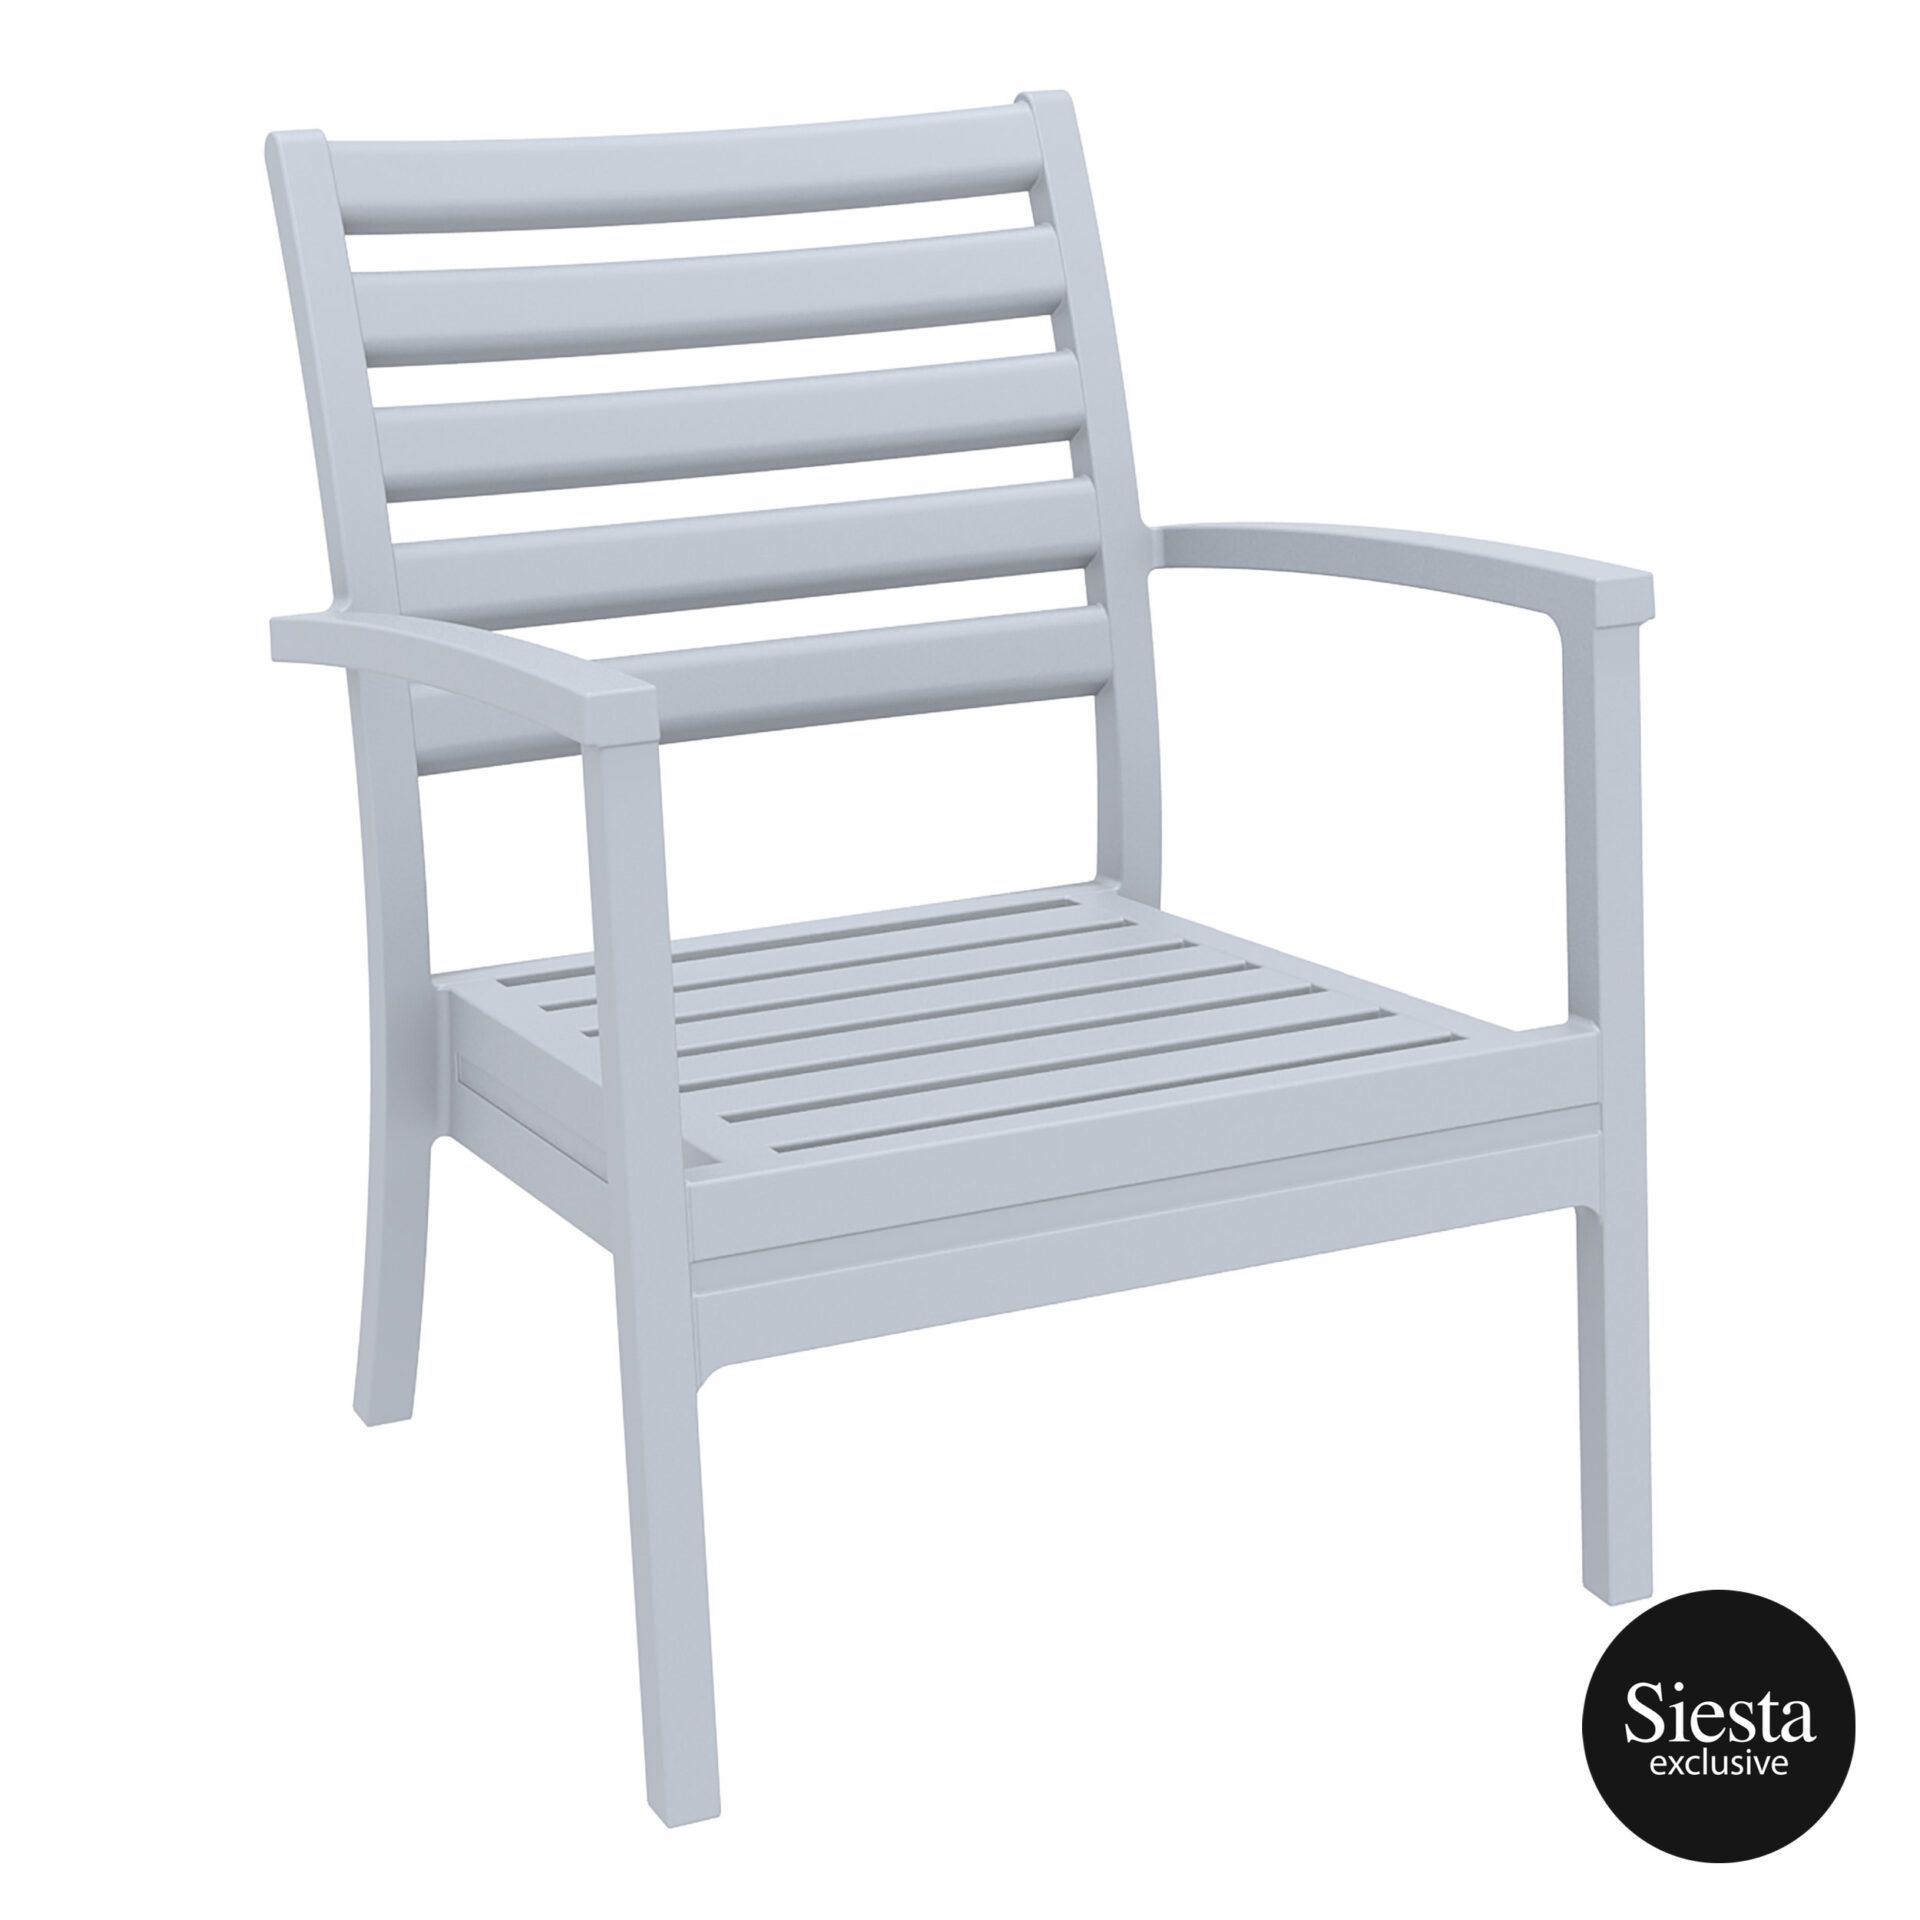 Artemis Outdoor Relax Armchair colour SILVER GREY available to order now!